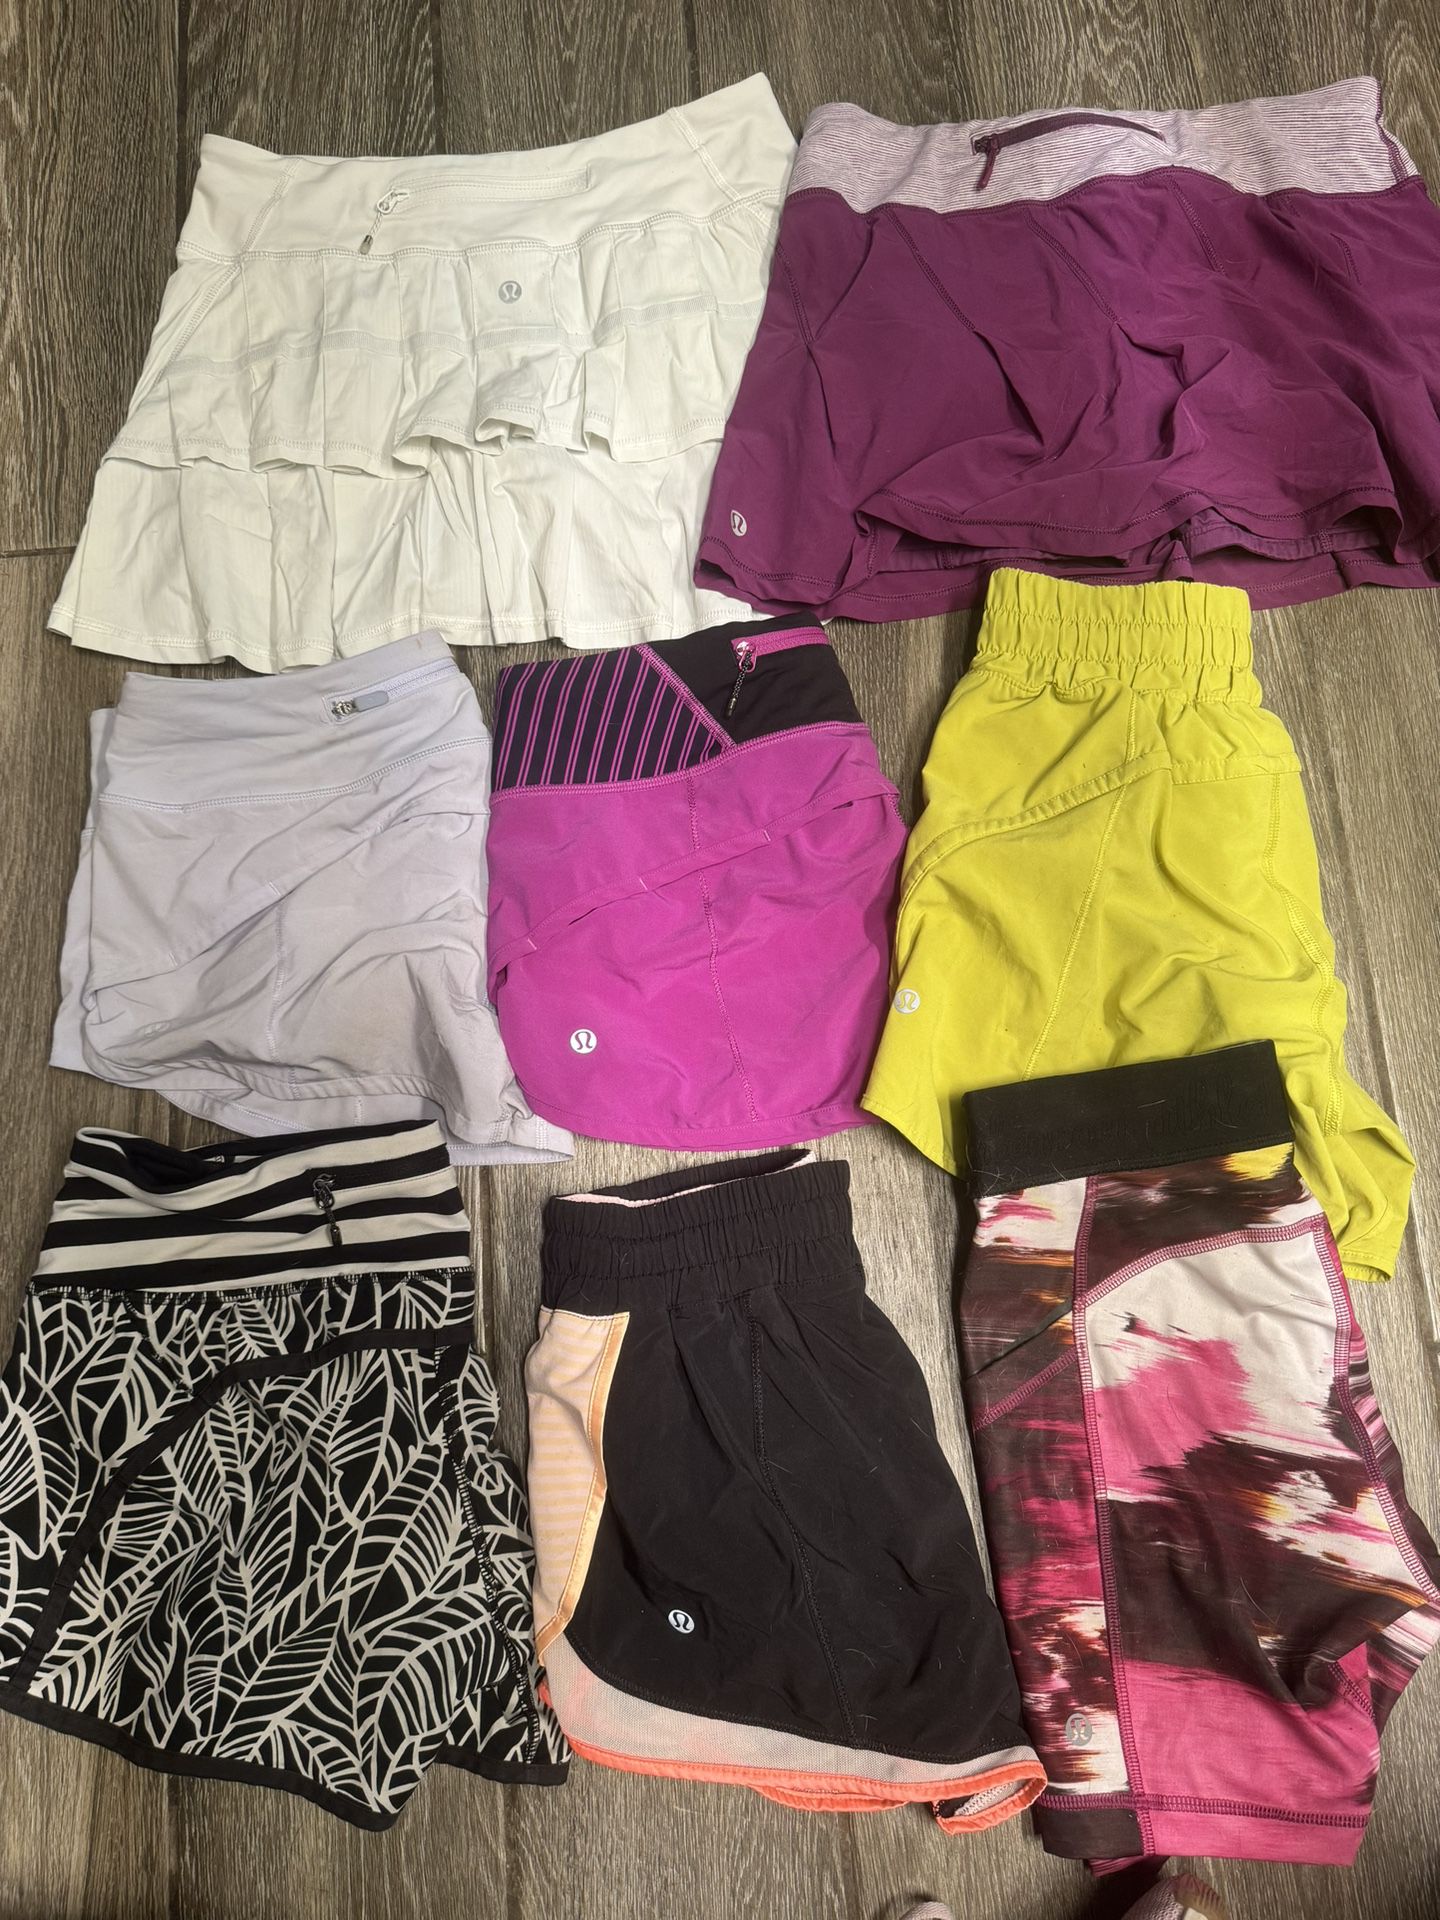 Lululemon size 4 Shorts - 6 pairs Skirts 2 pairs Must buy all 8 at $104 which is $13 each   Located in Mesa at mckellips and Stapley 